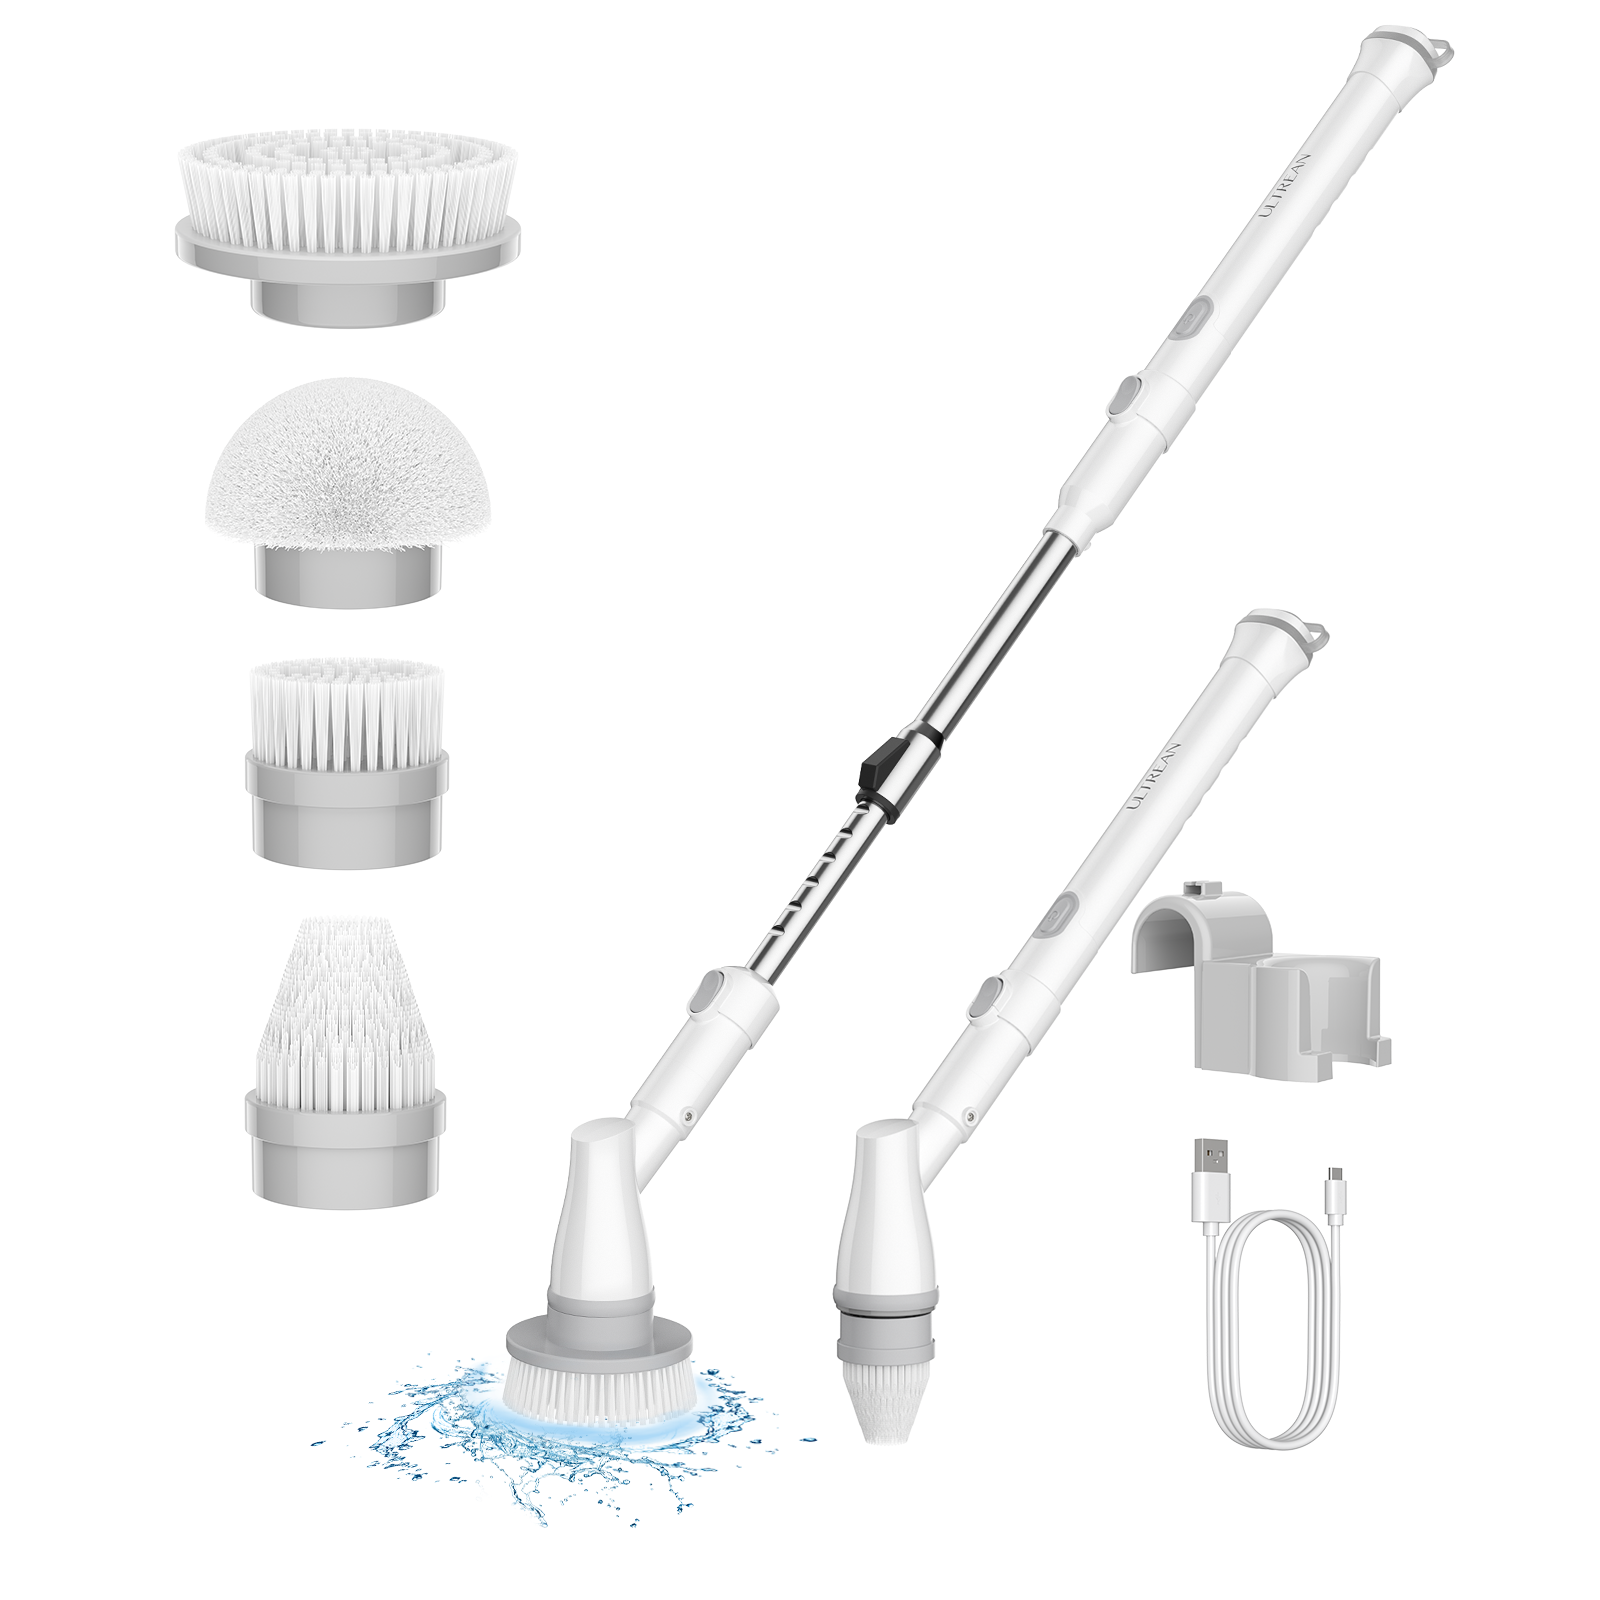 ELECTRIC BRUSH - CLEANER, SPINNER & SCRUBBER